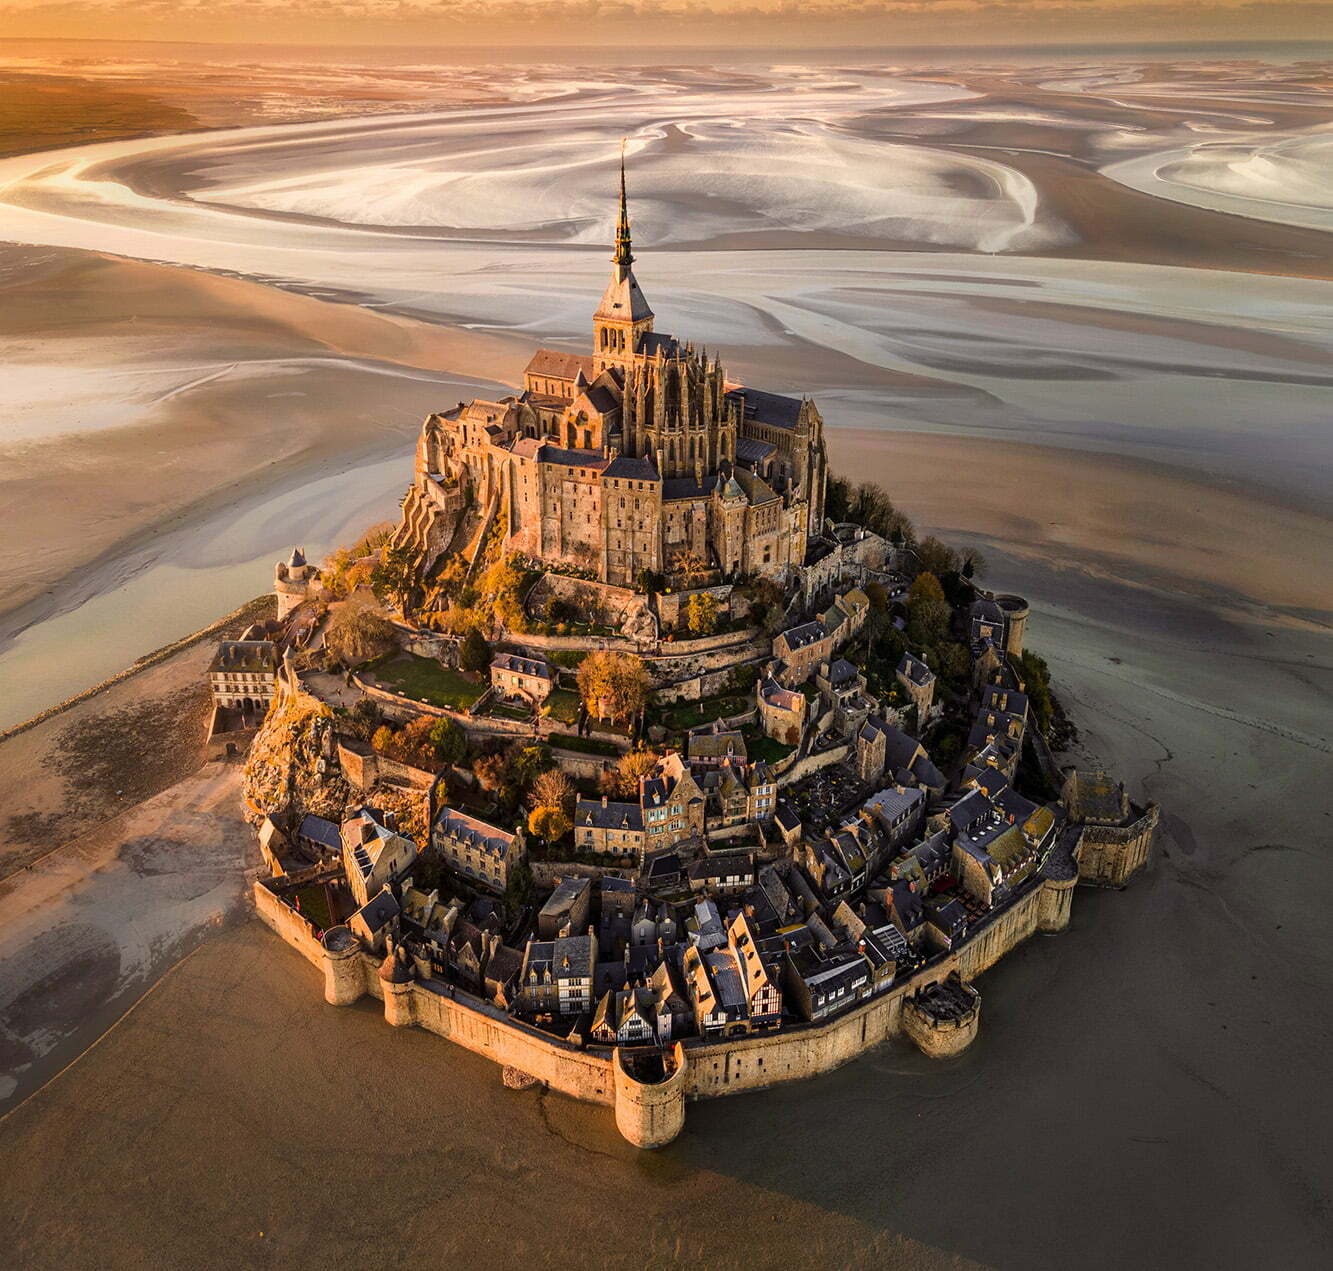 Le Mont Saint-Michel at Sunset - Photographer Name: Cigdem Ayyildiz. For me, this piece of art on the shores of Normandy is a candidate for Eighth Wonder of the World; providing a legendary view and atmosphere especially at sunset and when the tide is low. Copyright: © Cigdem Ayyildiz, Turkey, Shortlist, Open, Landscape, 2022 Sony World Photography Awards